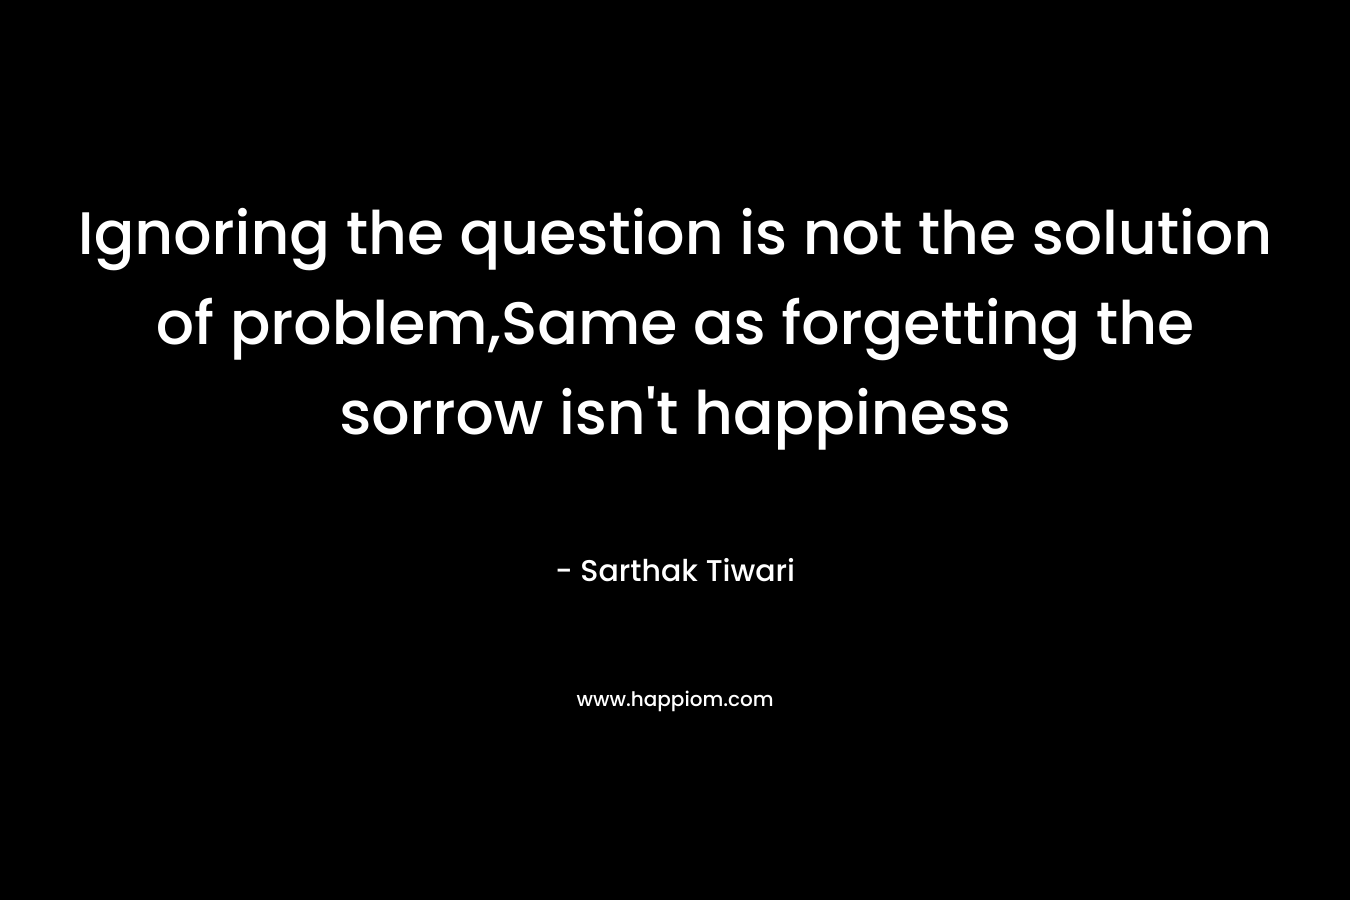 Ignoring the question is not the solution of problem,Same as forgetting the sorrow isn’t happiness – Sarthak Tiwari